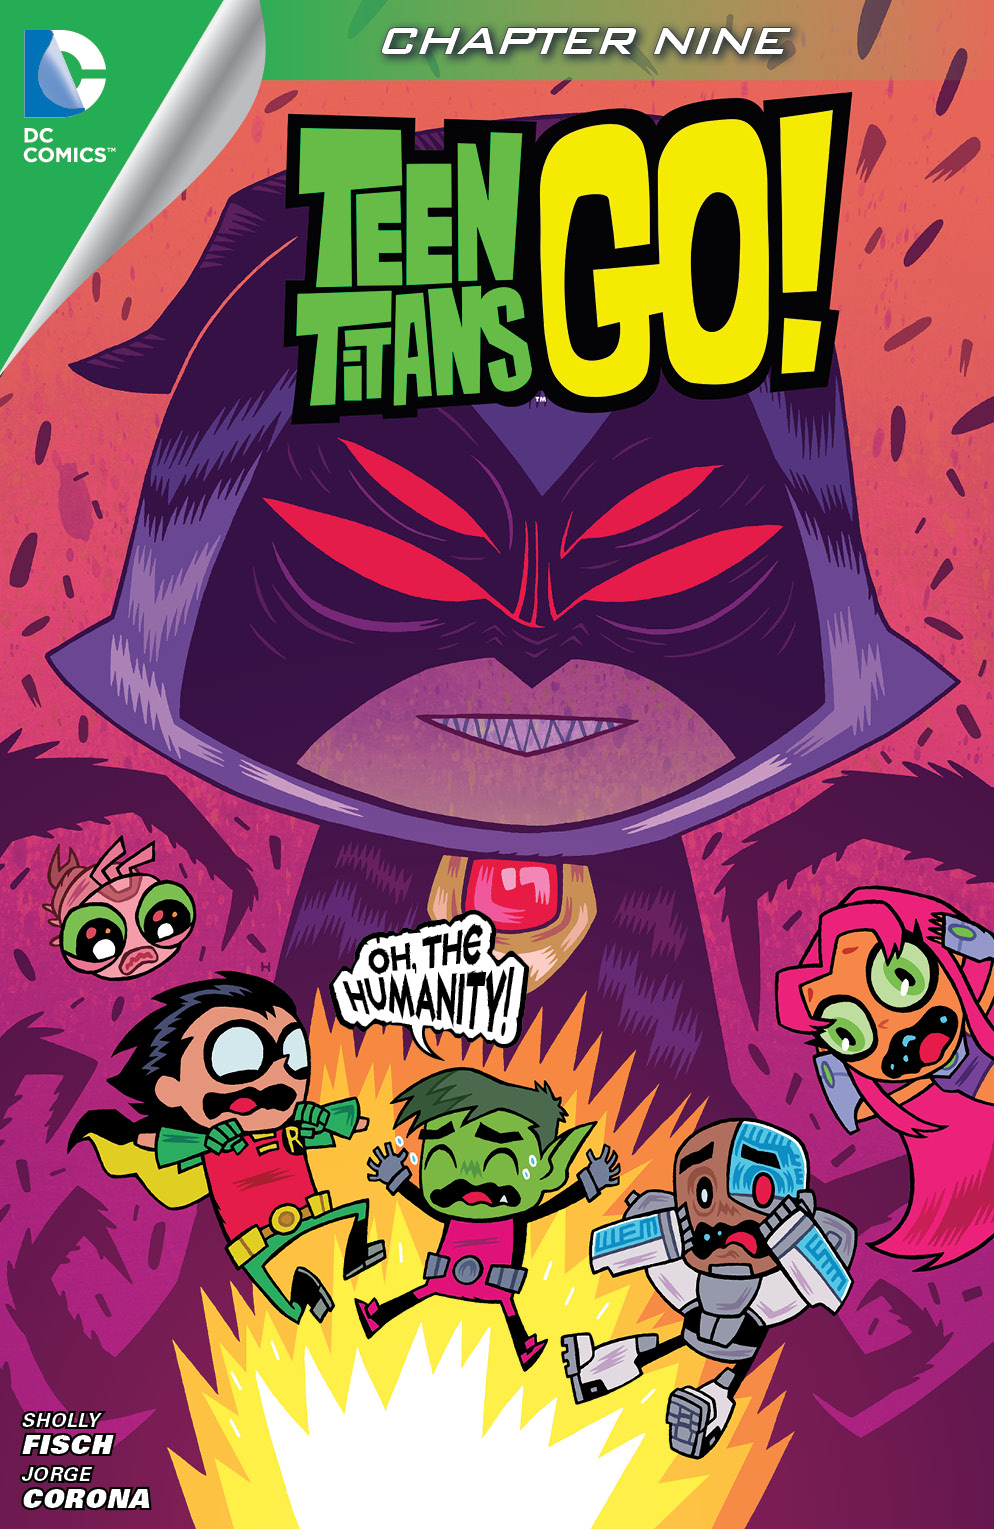 Teen Titans Go! (2013-) #9 preview images